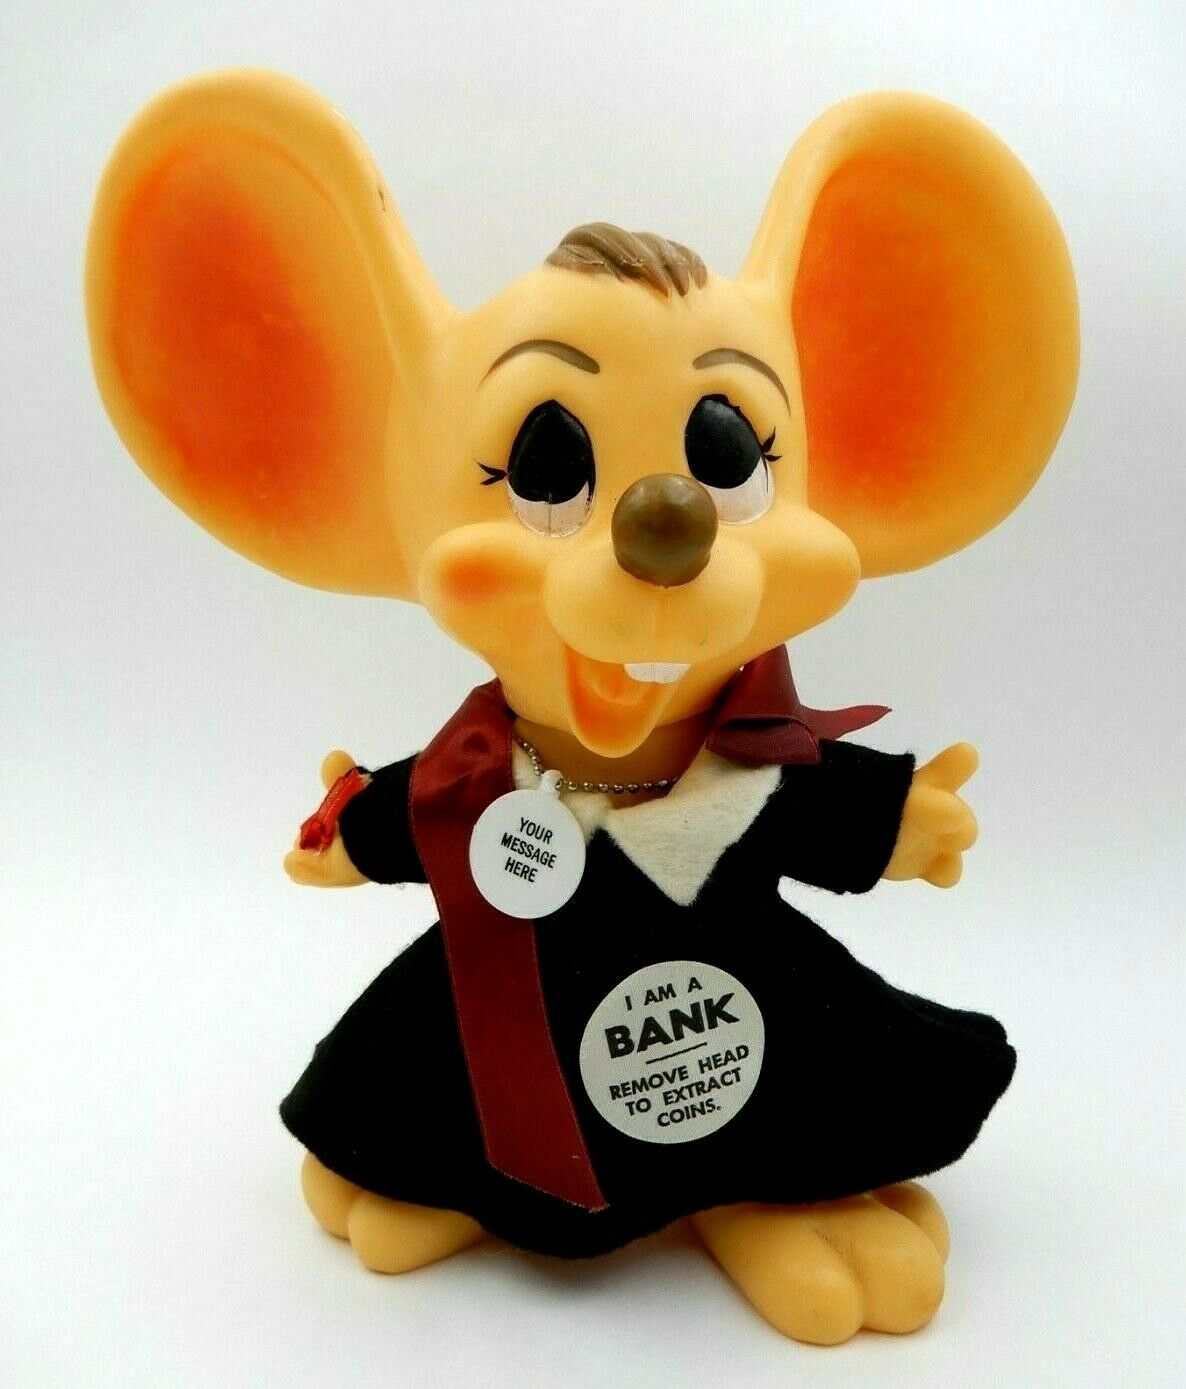 VINTAGE 1960\'S ROYAL INDUSTRIES GIANT MOUSE BANK CREDIT UNION FIGURINE COIN BANK